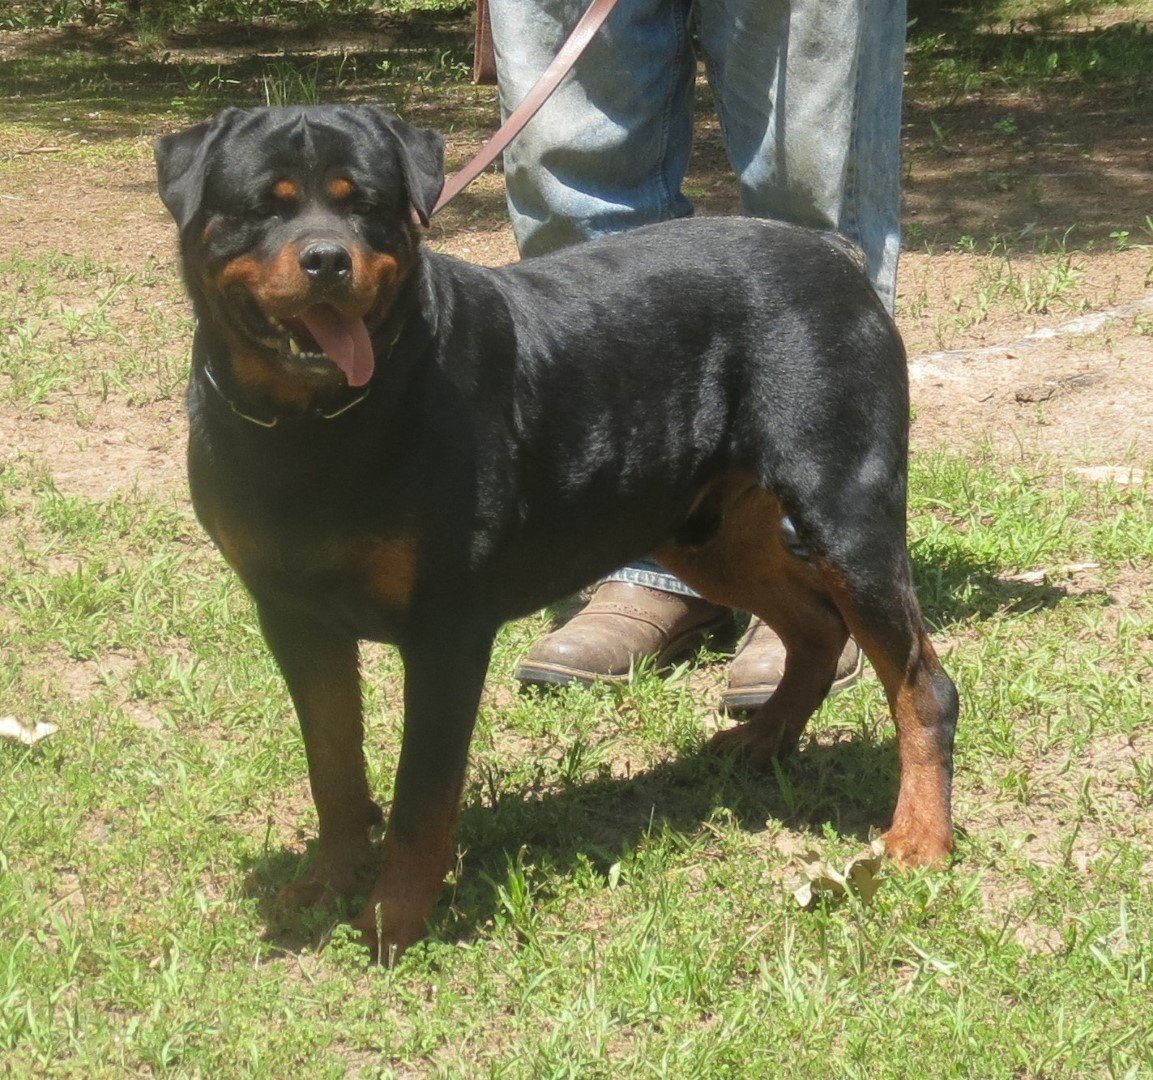 white patch on rottweiler chest